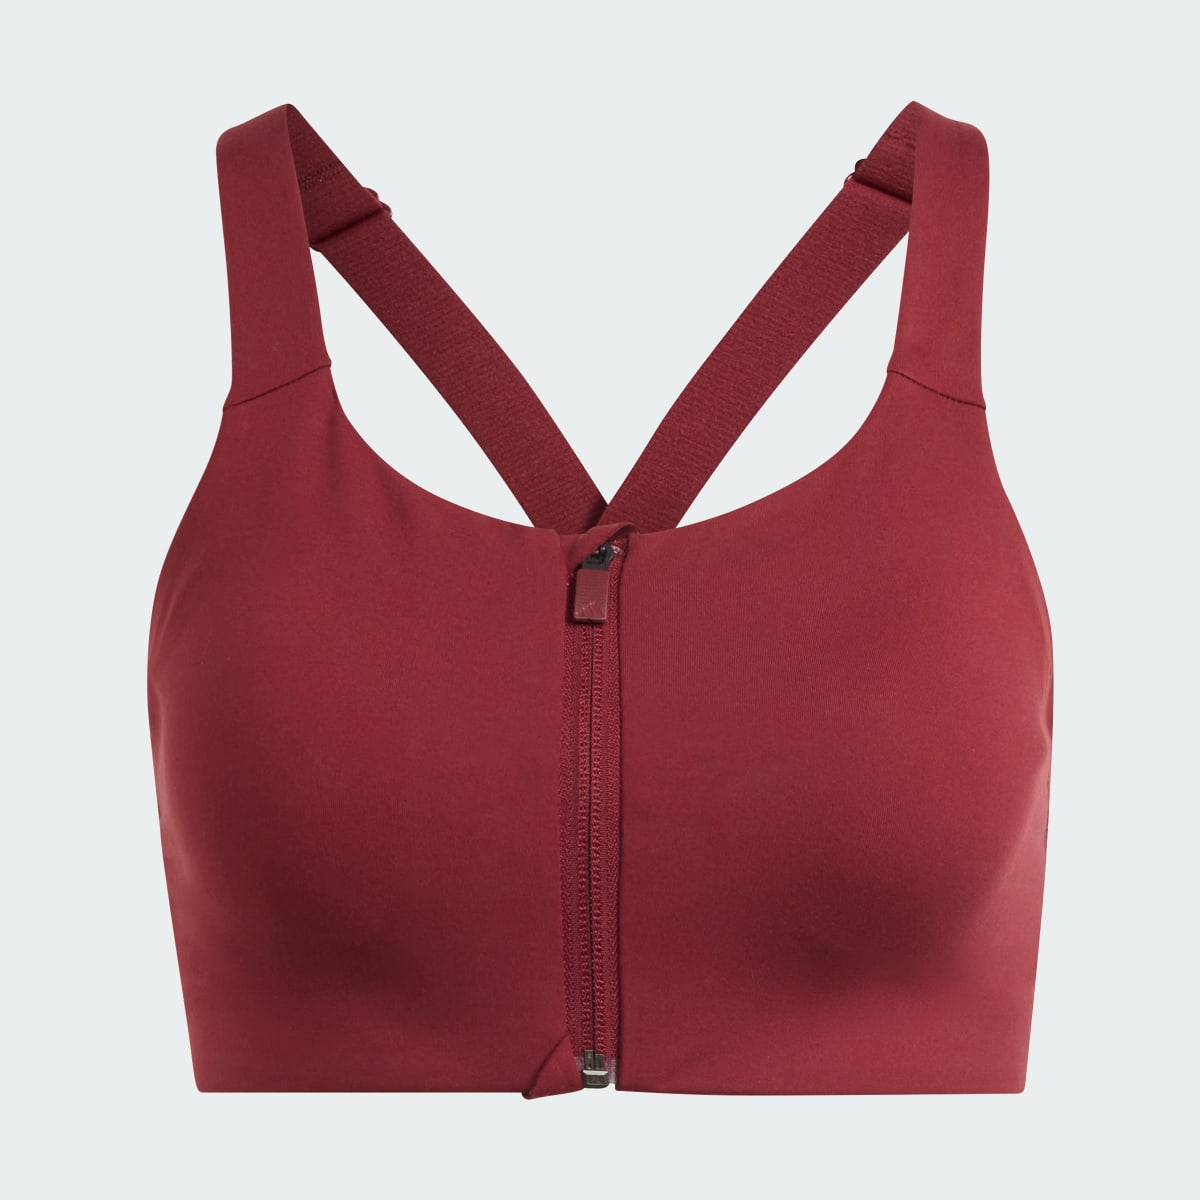 Adidas Brassière zippée maintien fort TLRD Impact Luxe. 5